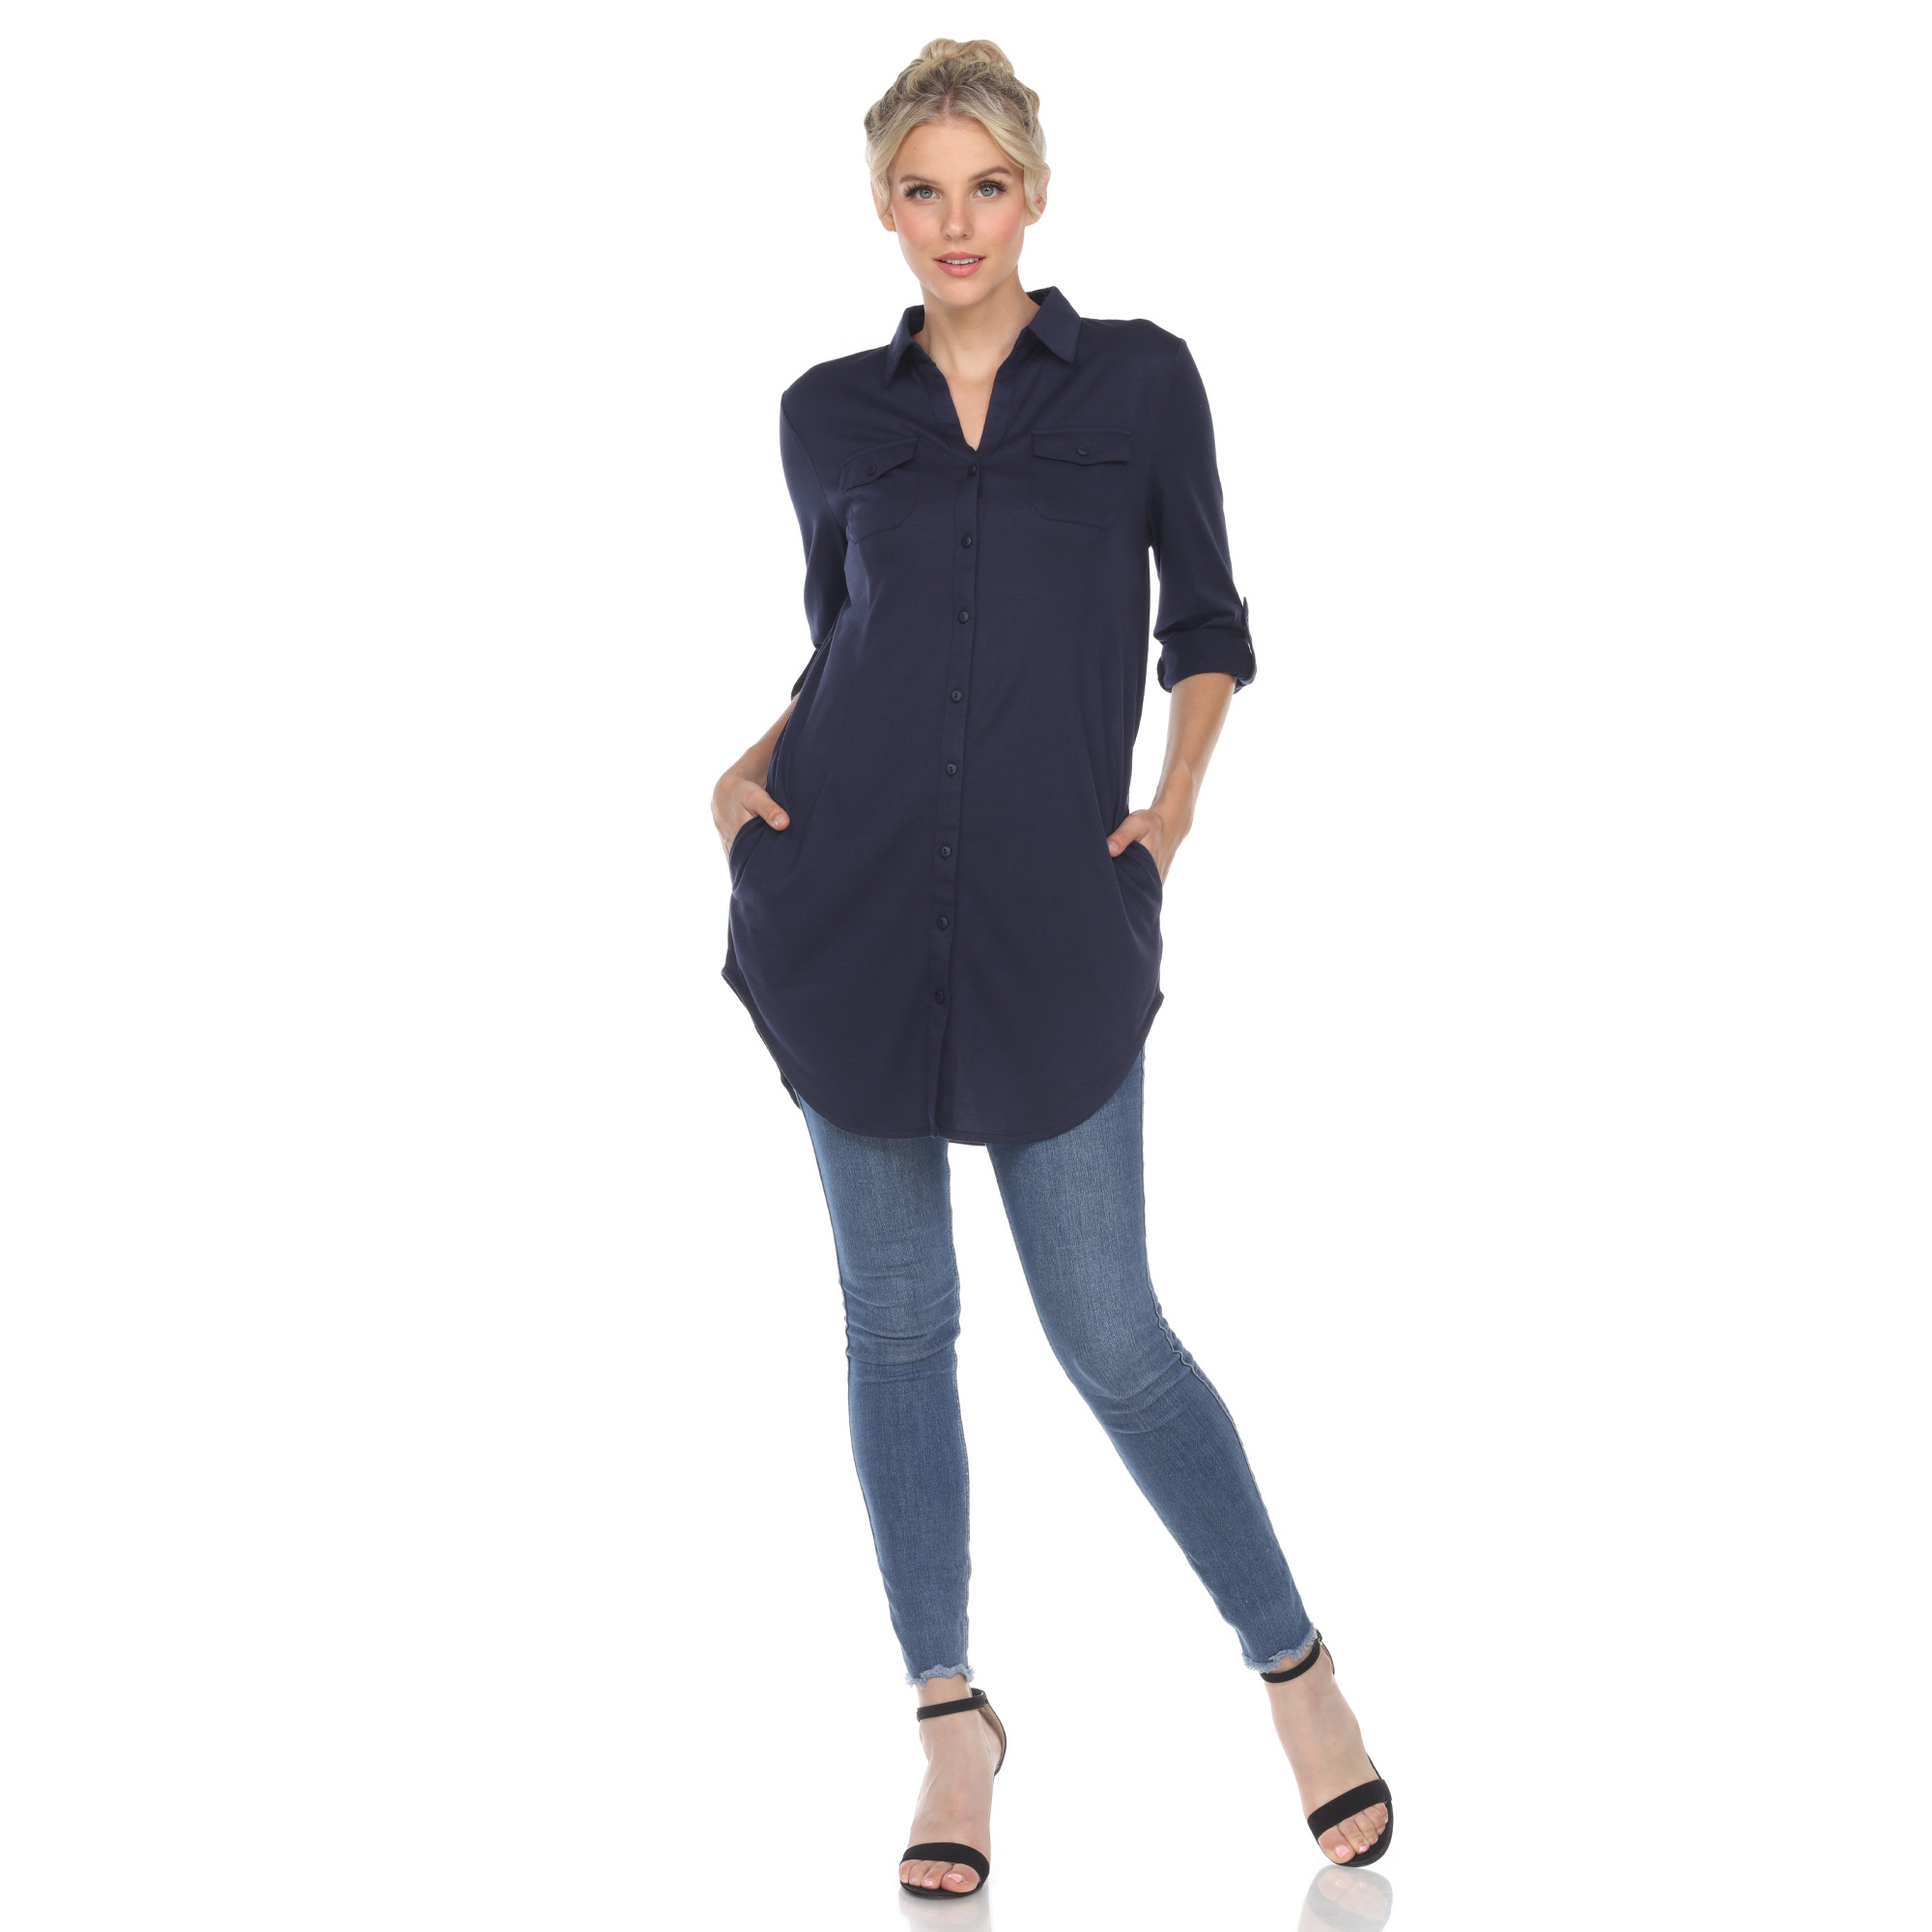 White Mark Women's Stretchy Quarter Sleeve Button Down Tunic Top With Pockets - Navy, 1X